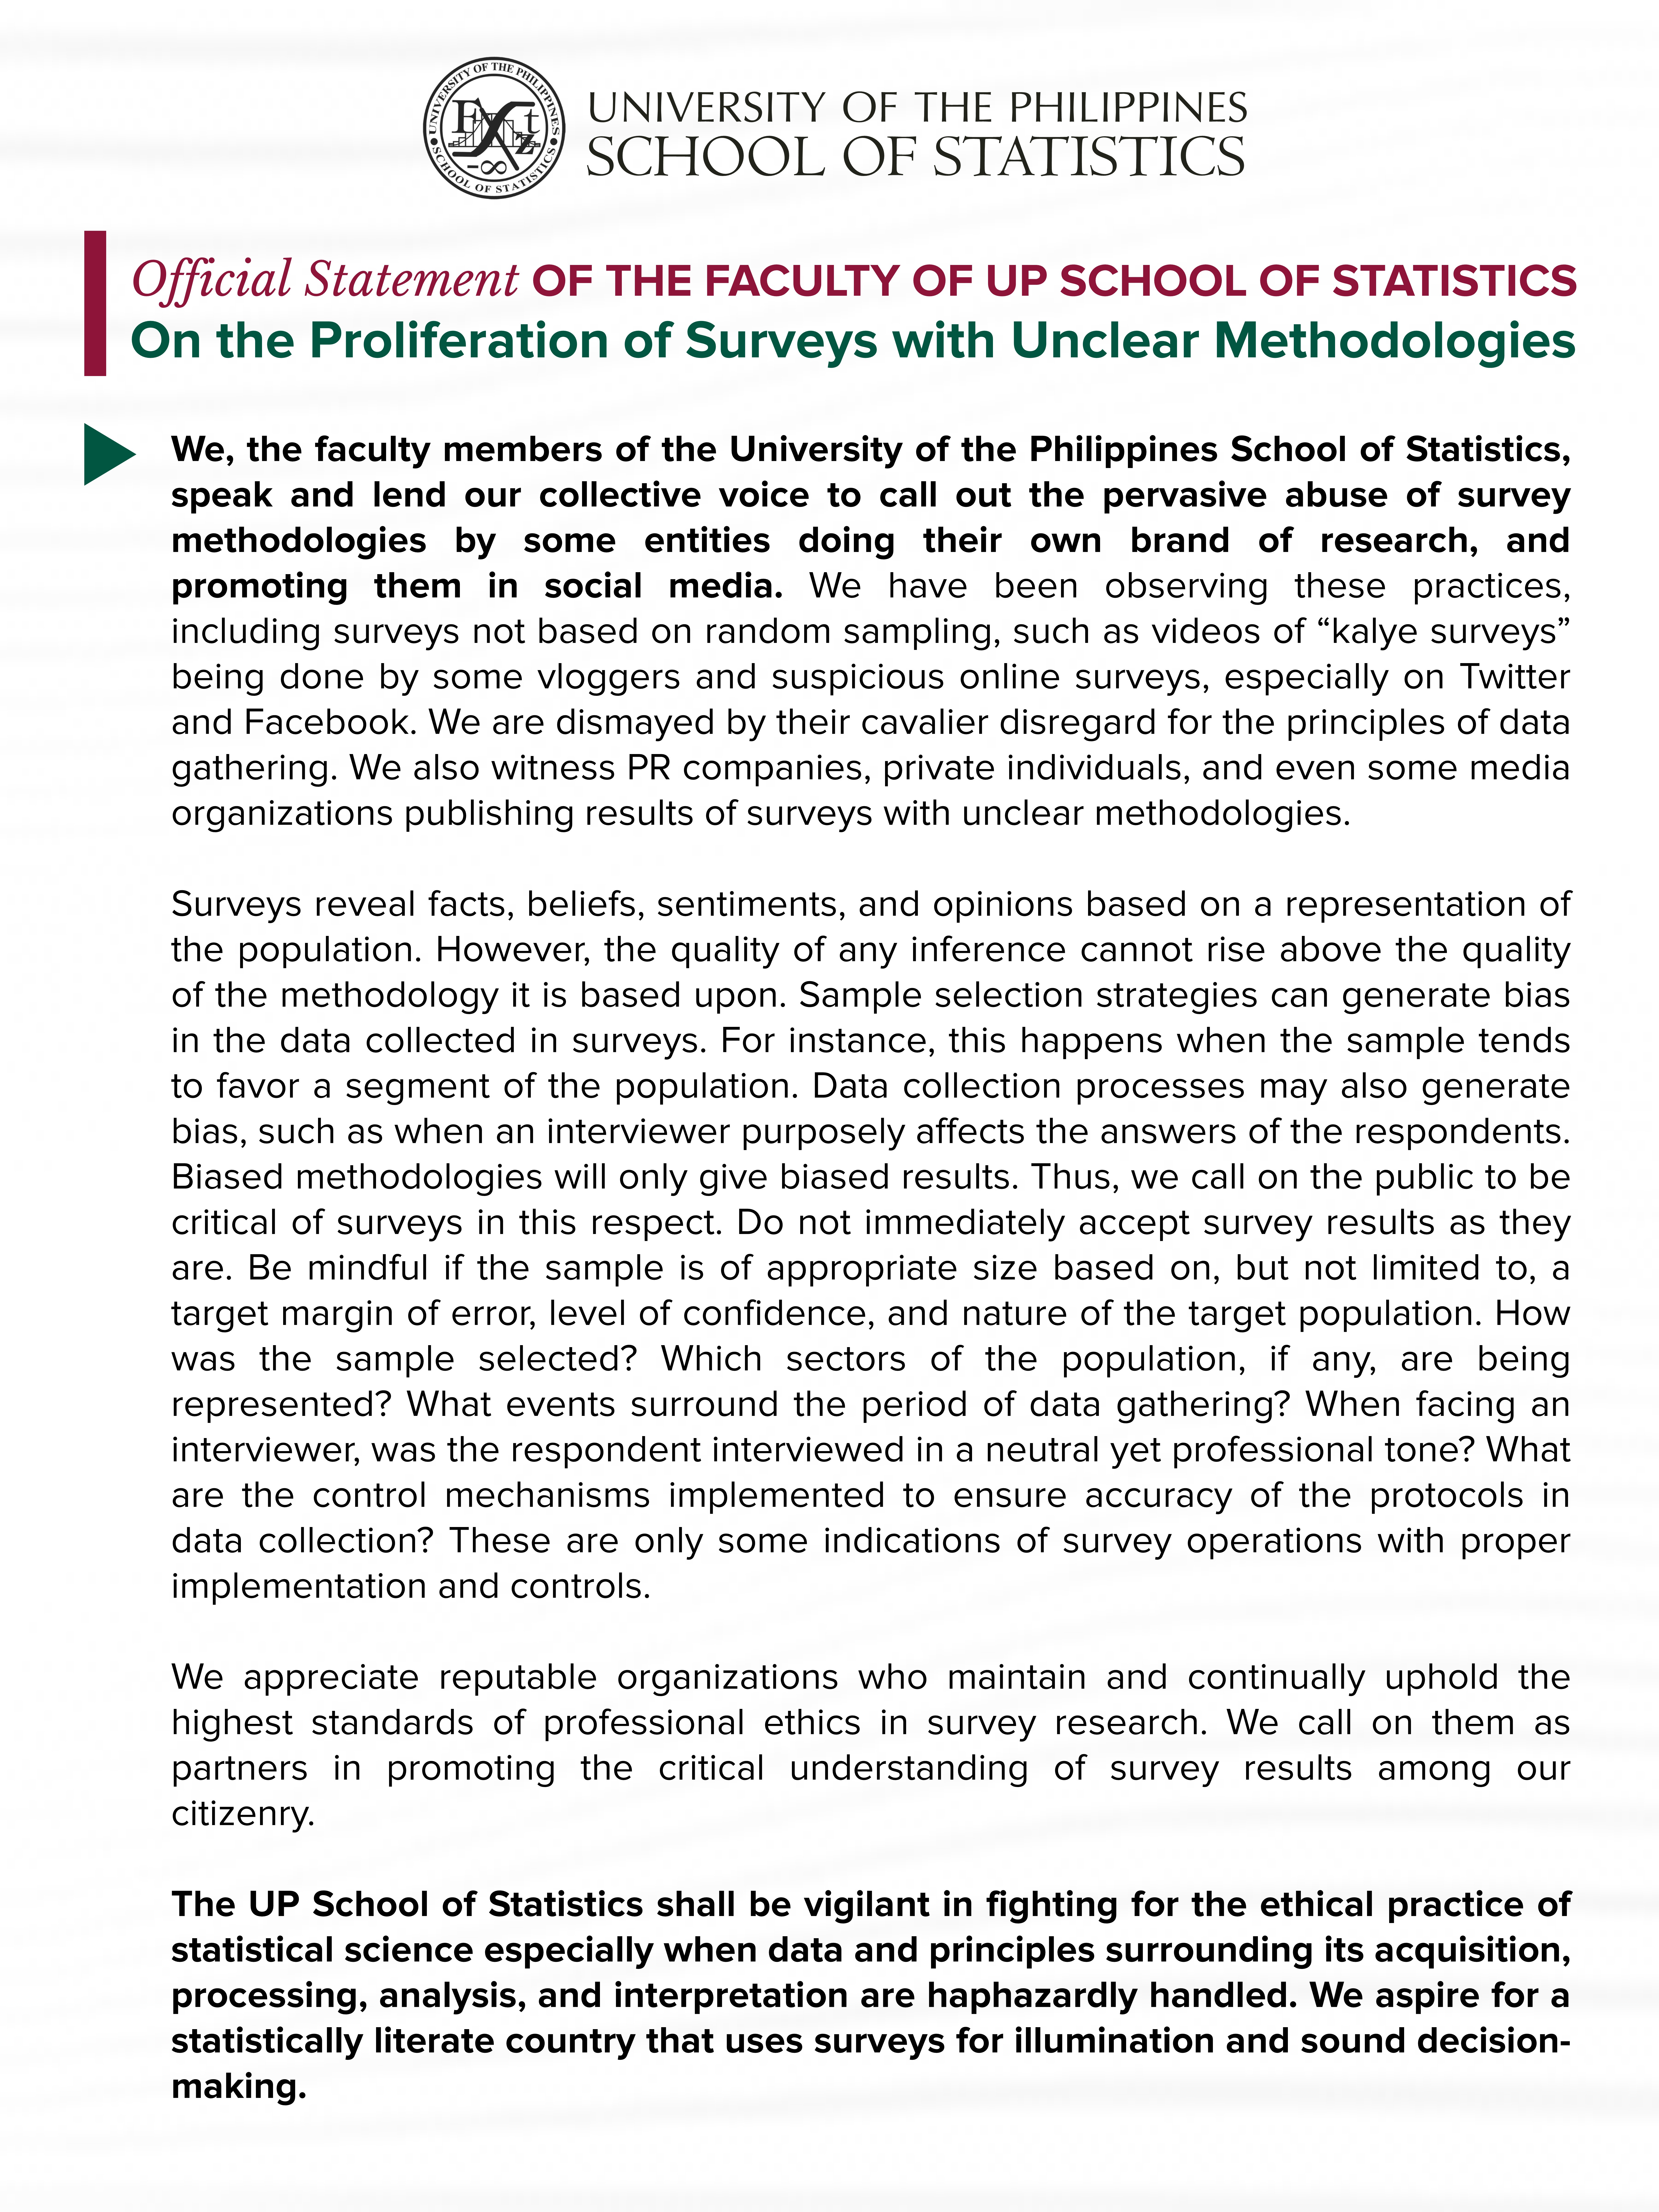 Image for Official Statement of the Faculty of UPSS on the Proliferation of Surveys with Unclear Methodologies